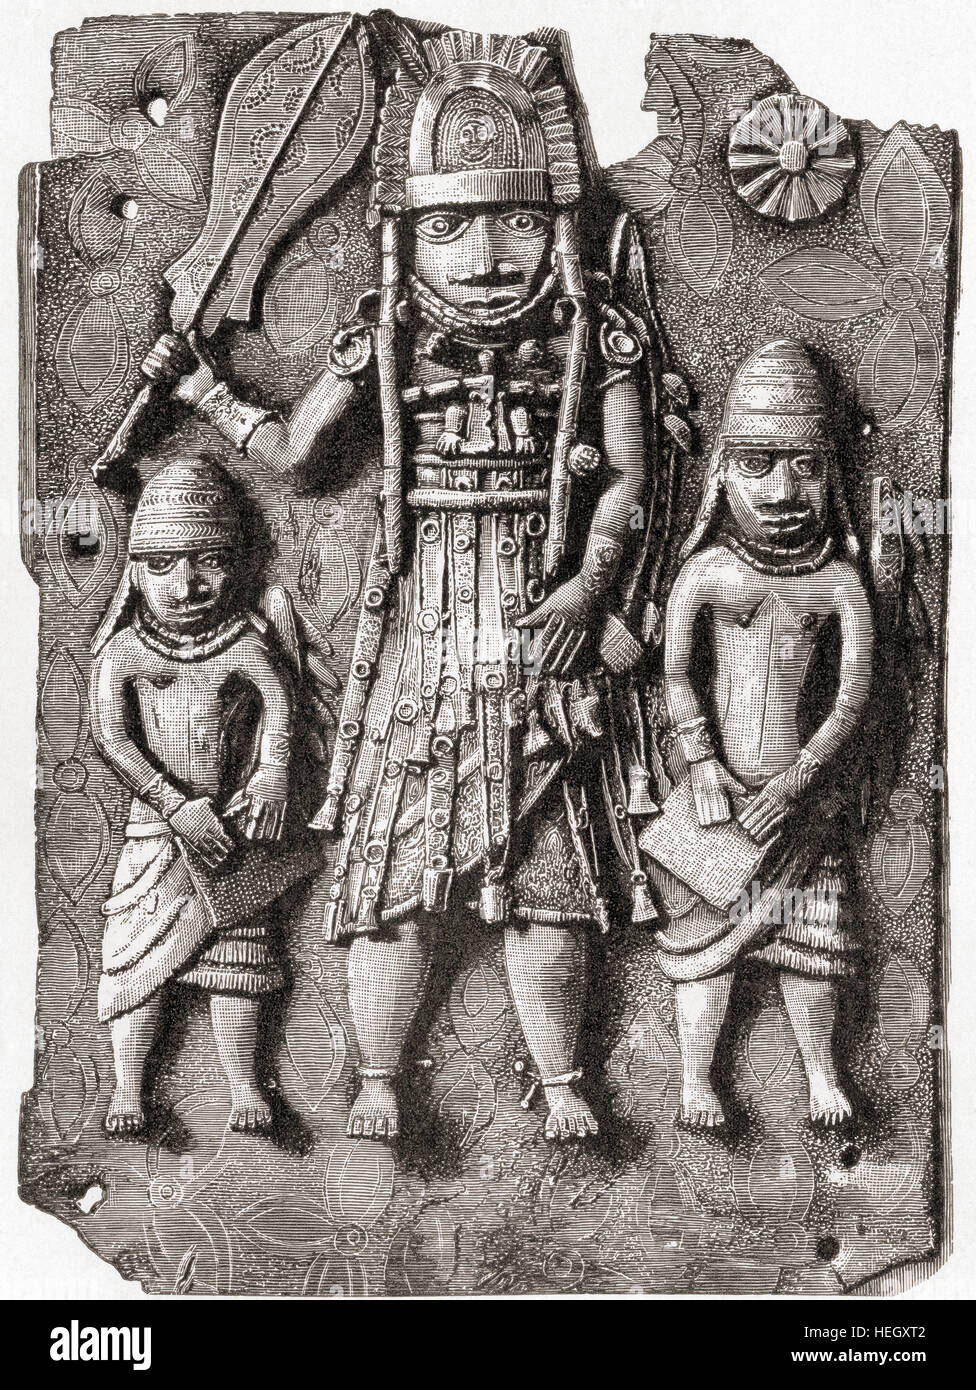 One of the Benin Bronze plaques which originally decorated the royal palace of the Benin Kingdom in modern-day Nigeria.  From Meyers Lexicon, published 1924. Stock Photo